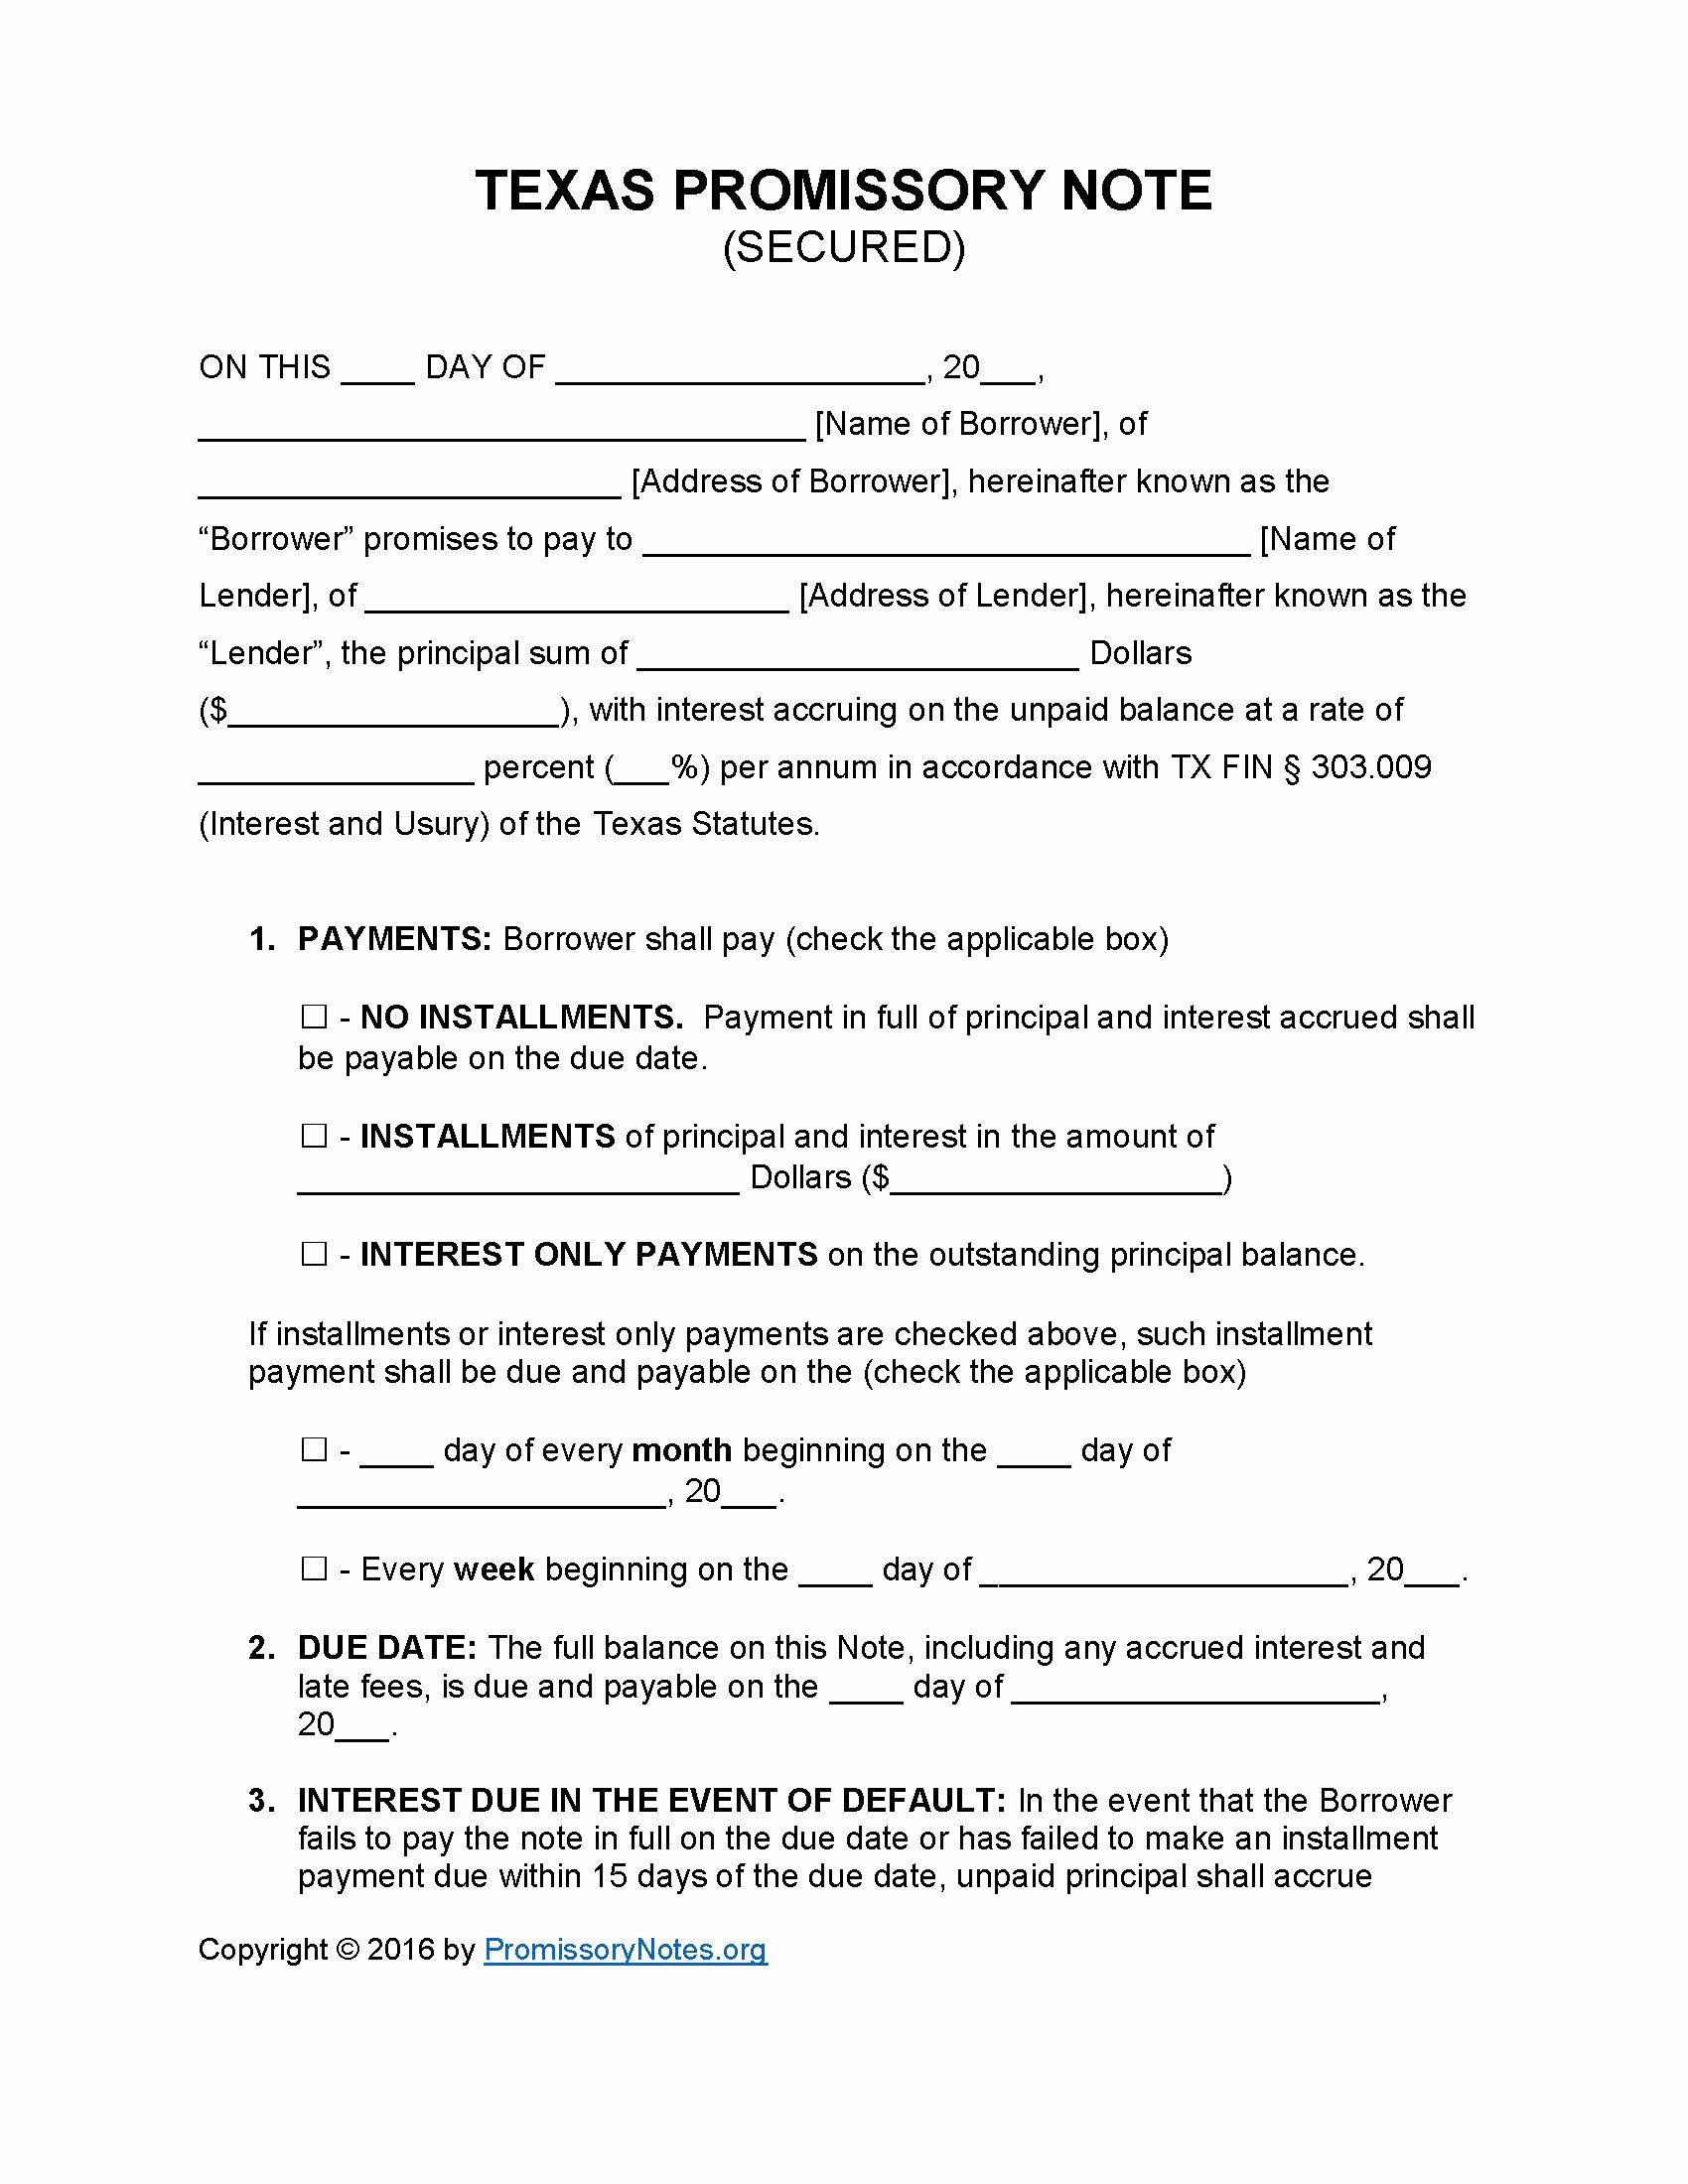 Promissory Note Template California Lovely Texas Secured Promissory Note Template Promissory Notes